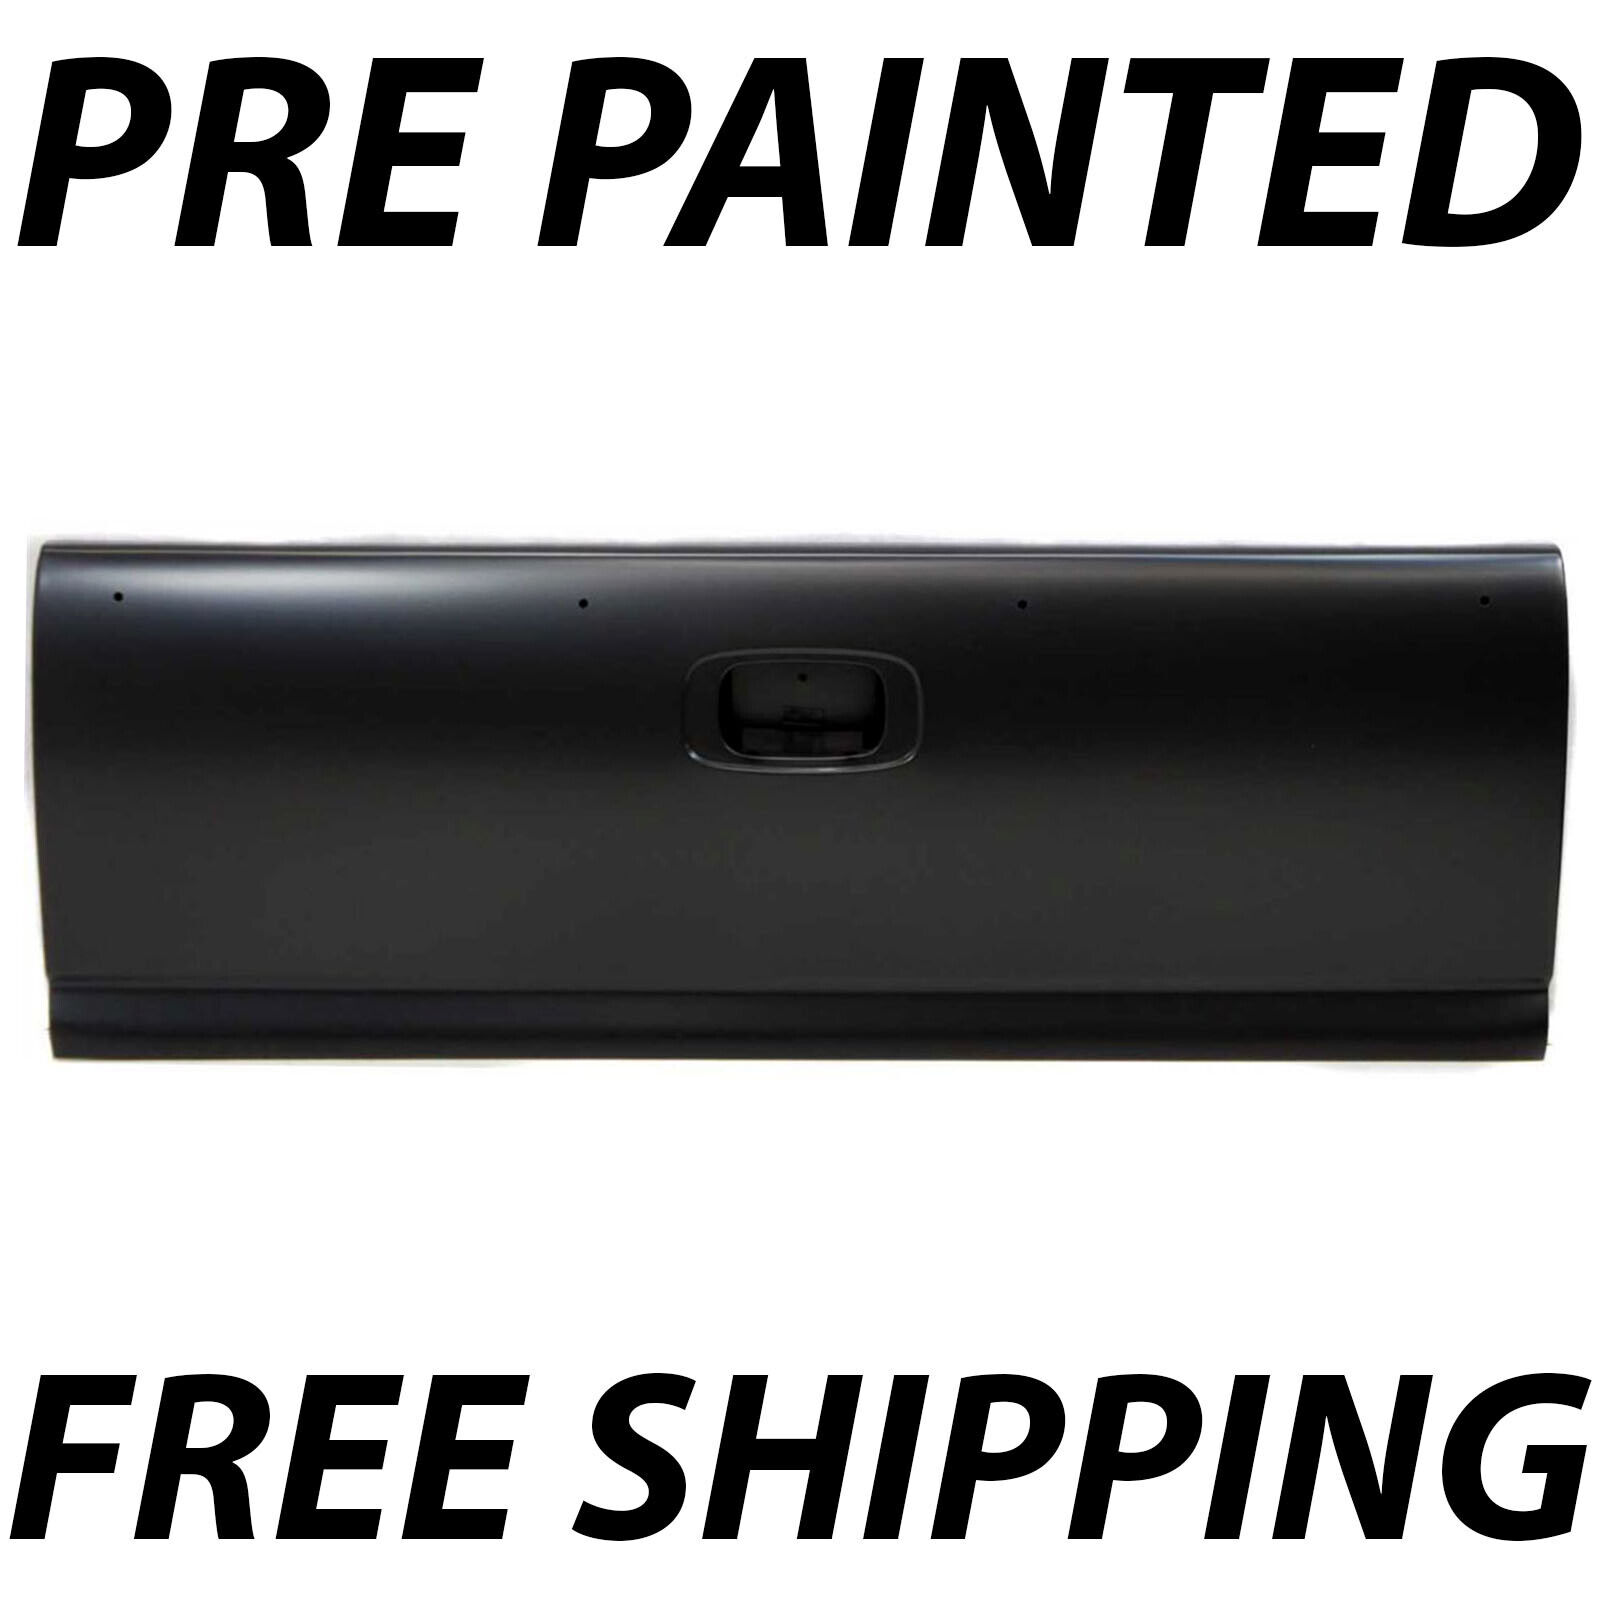 NEW Painted To Match - Rear Tailgate for 1999-2006 Chevy Silverado GMC Sierra